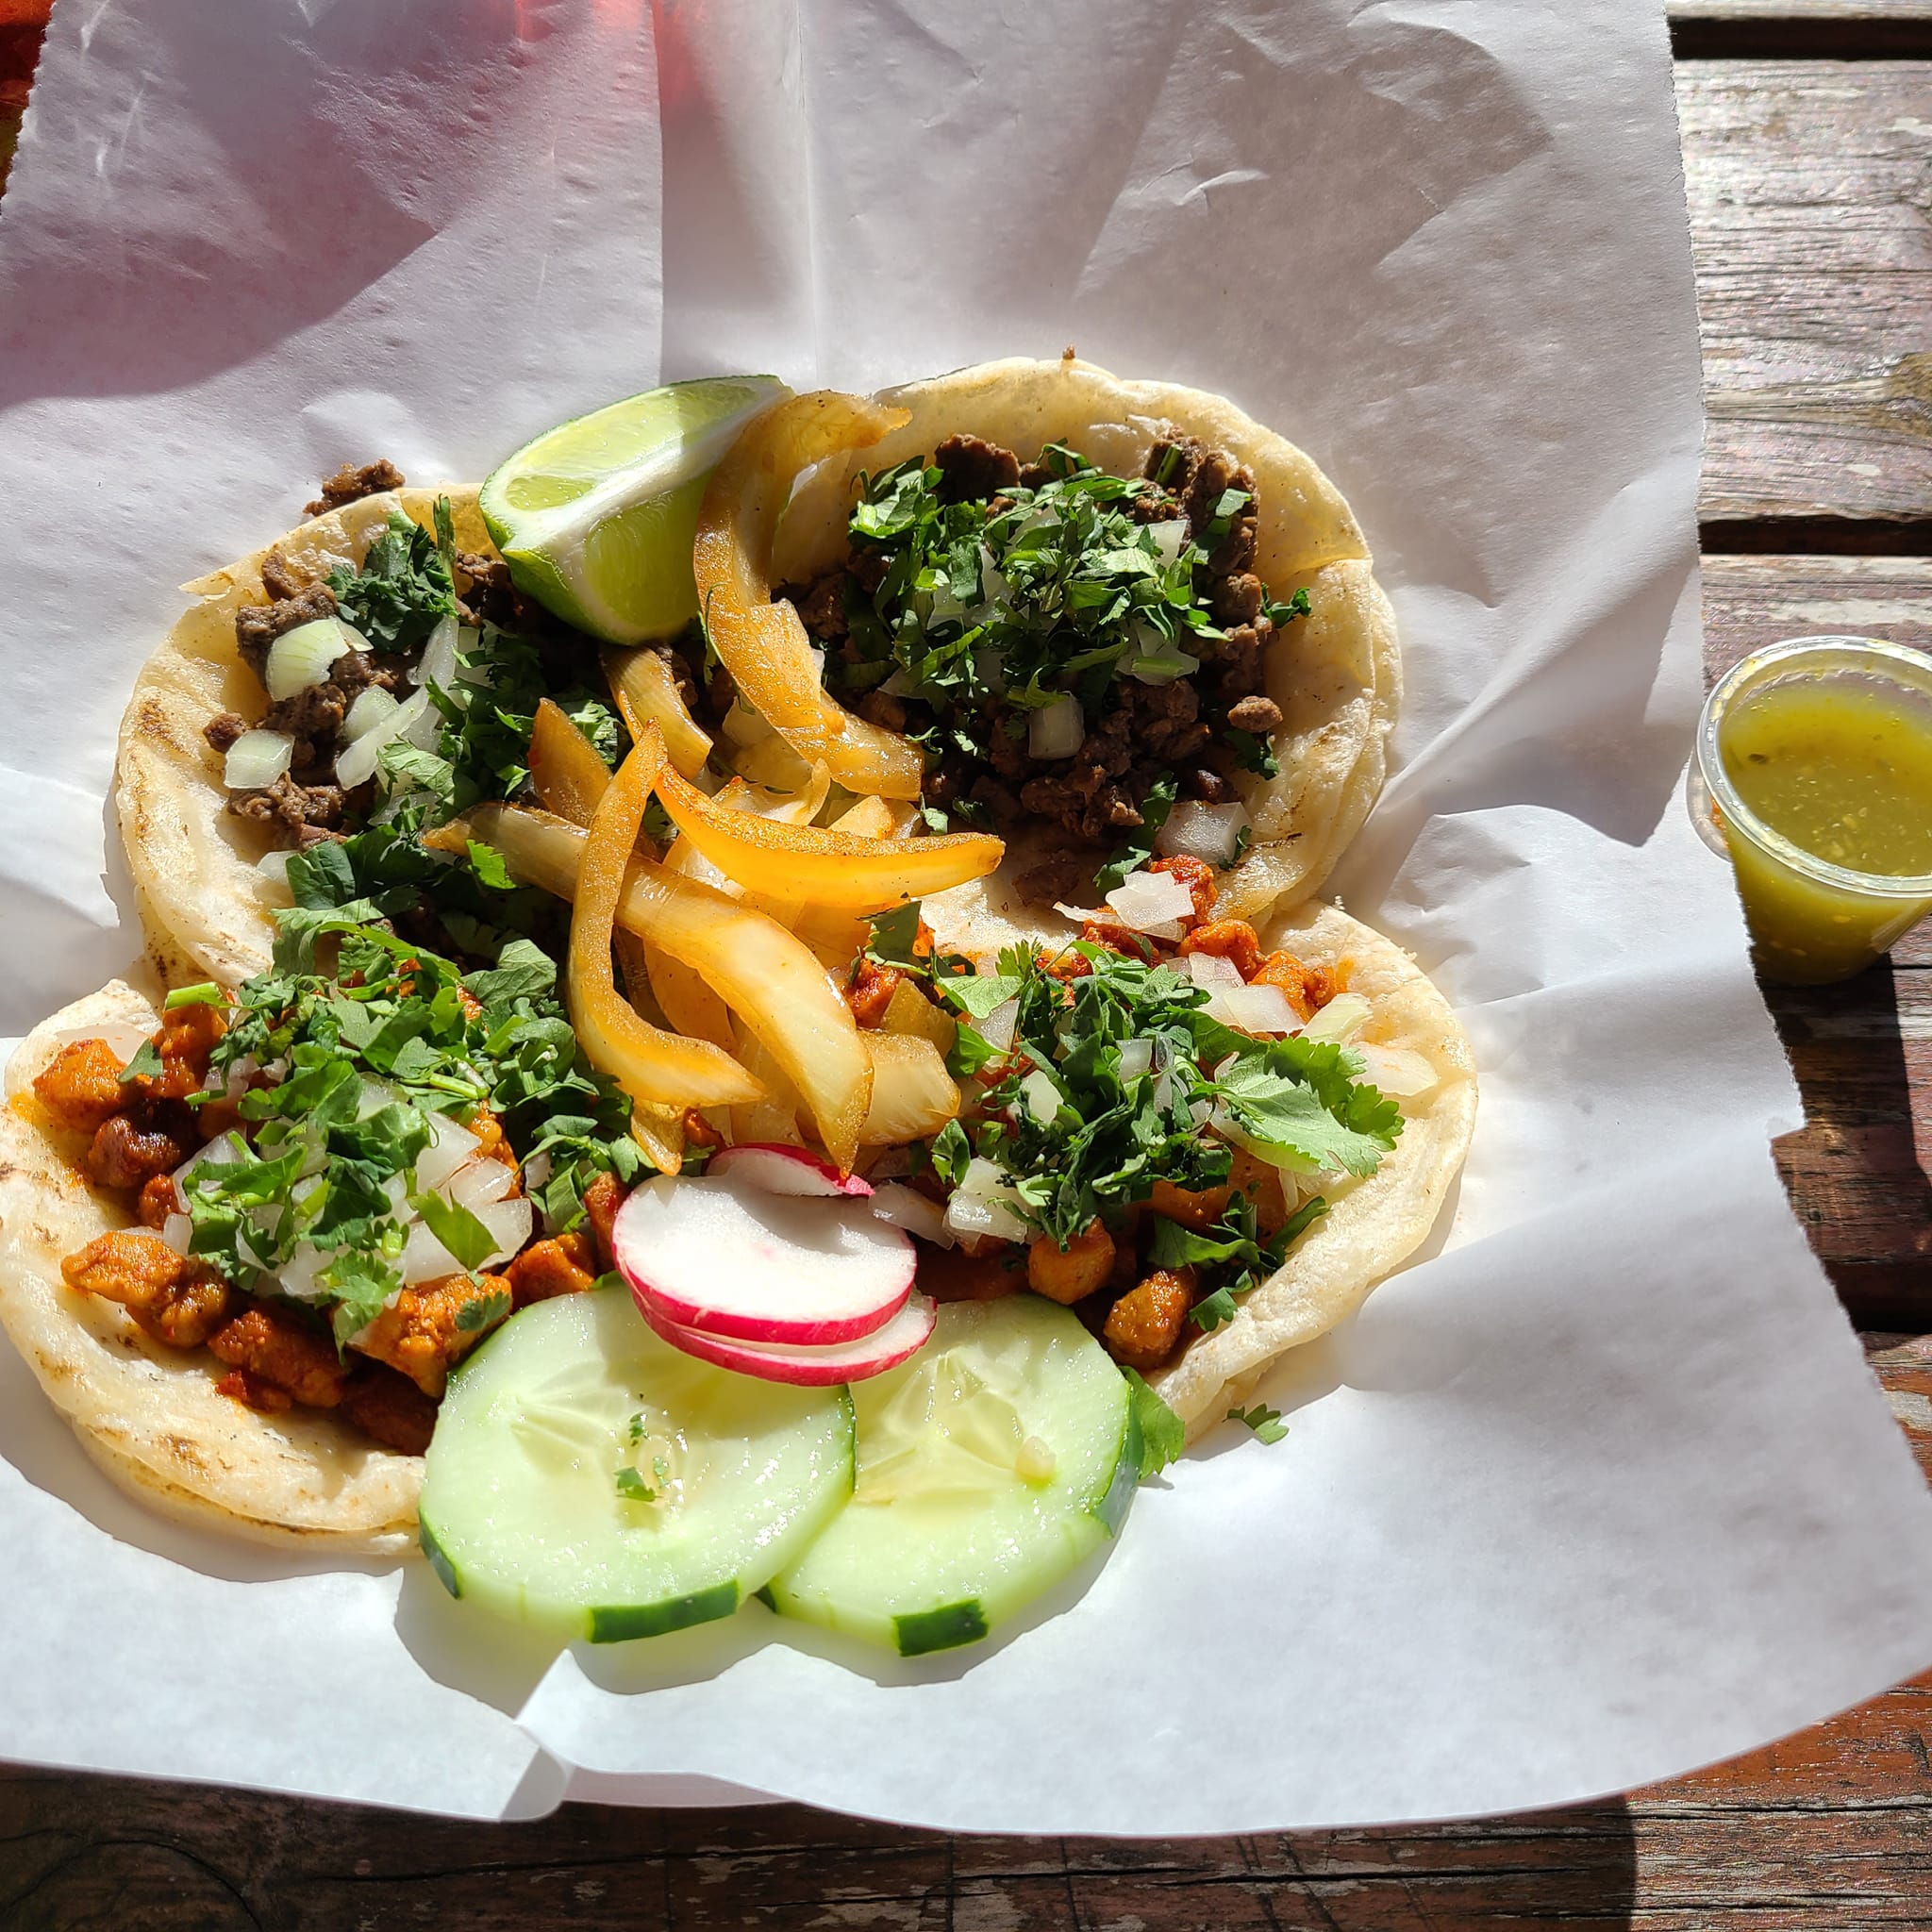 Tacos on a wooden table.